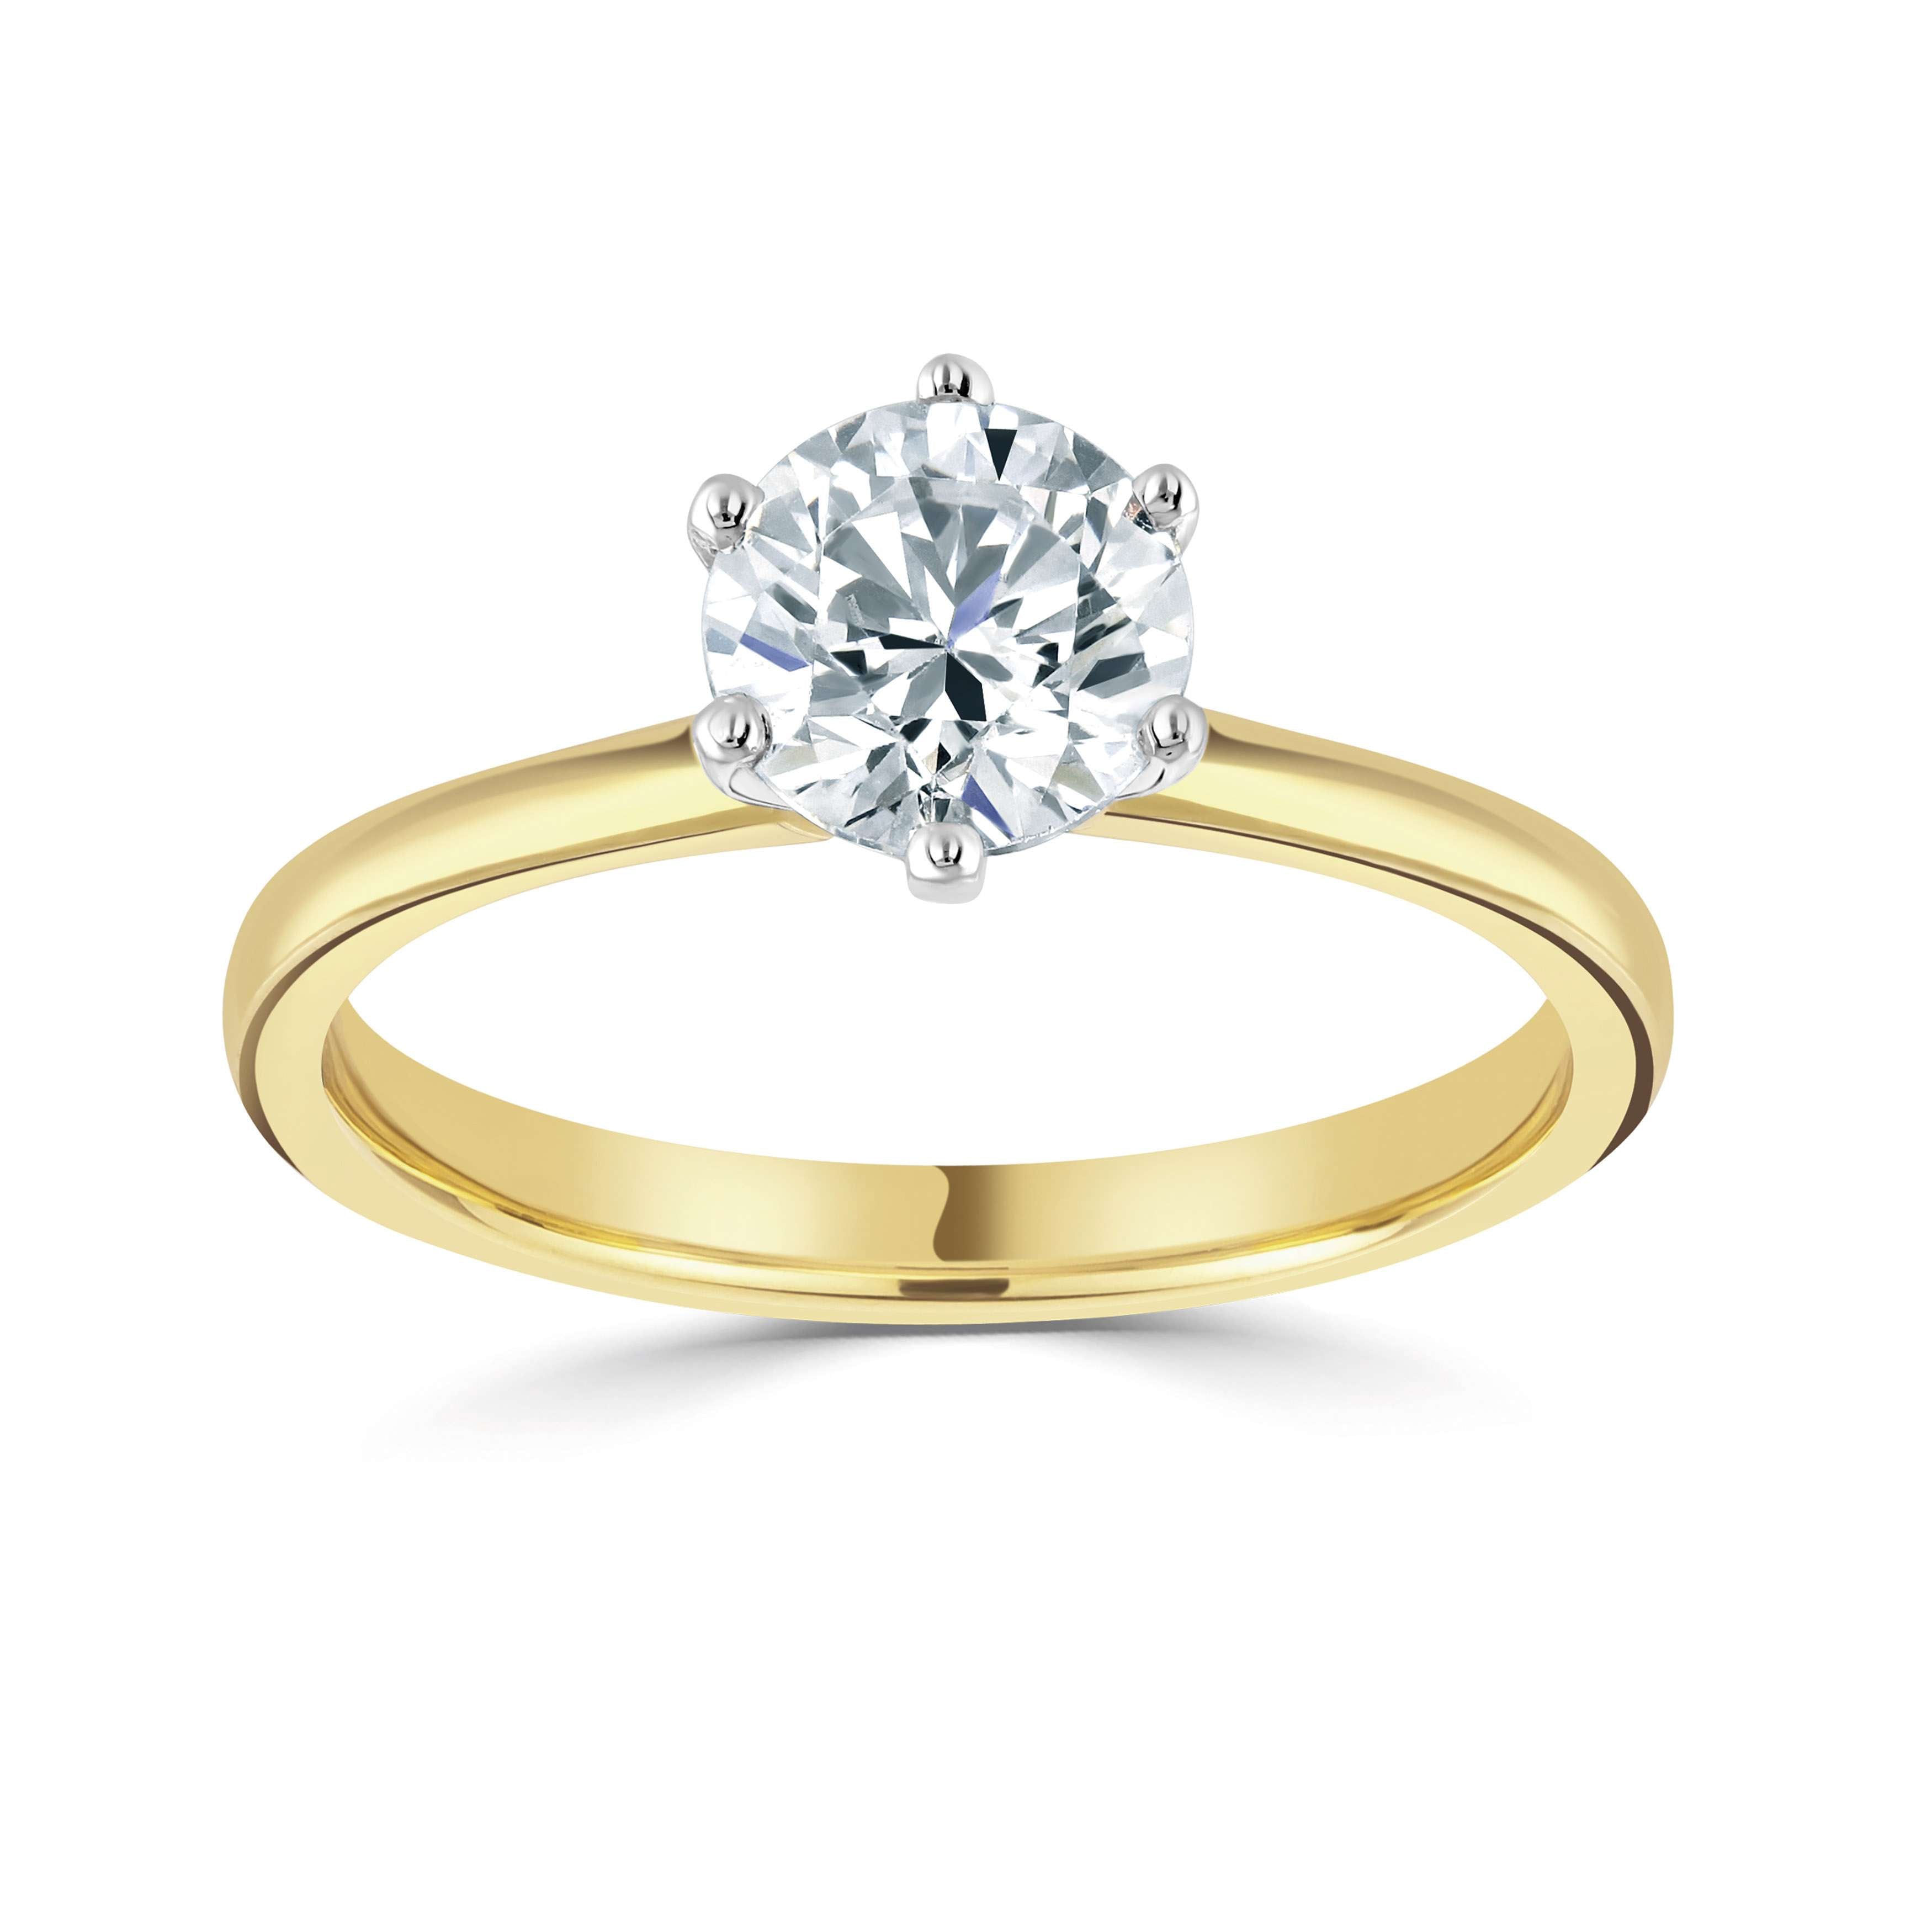 Makenna *Select a Round Diamond 0.25ct or above